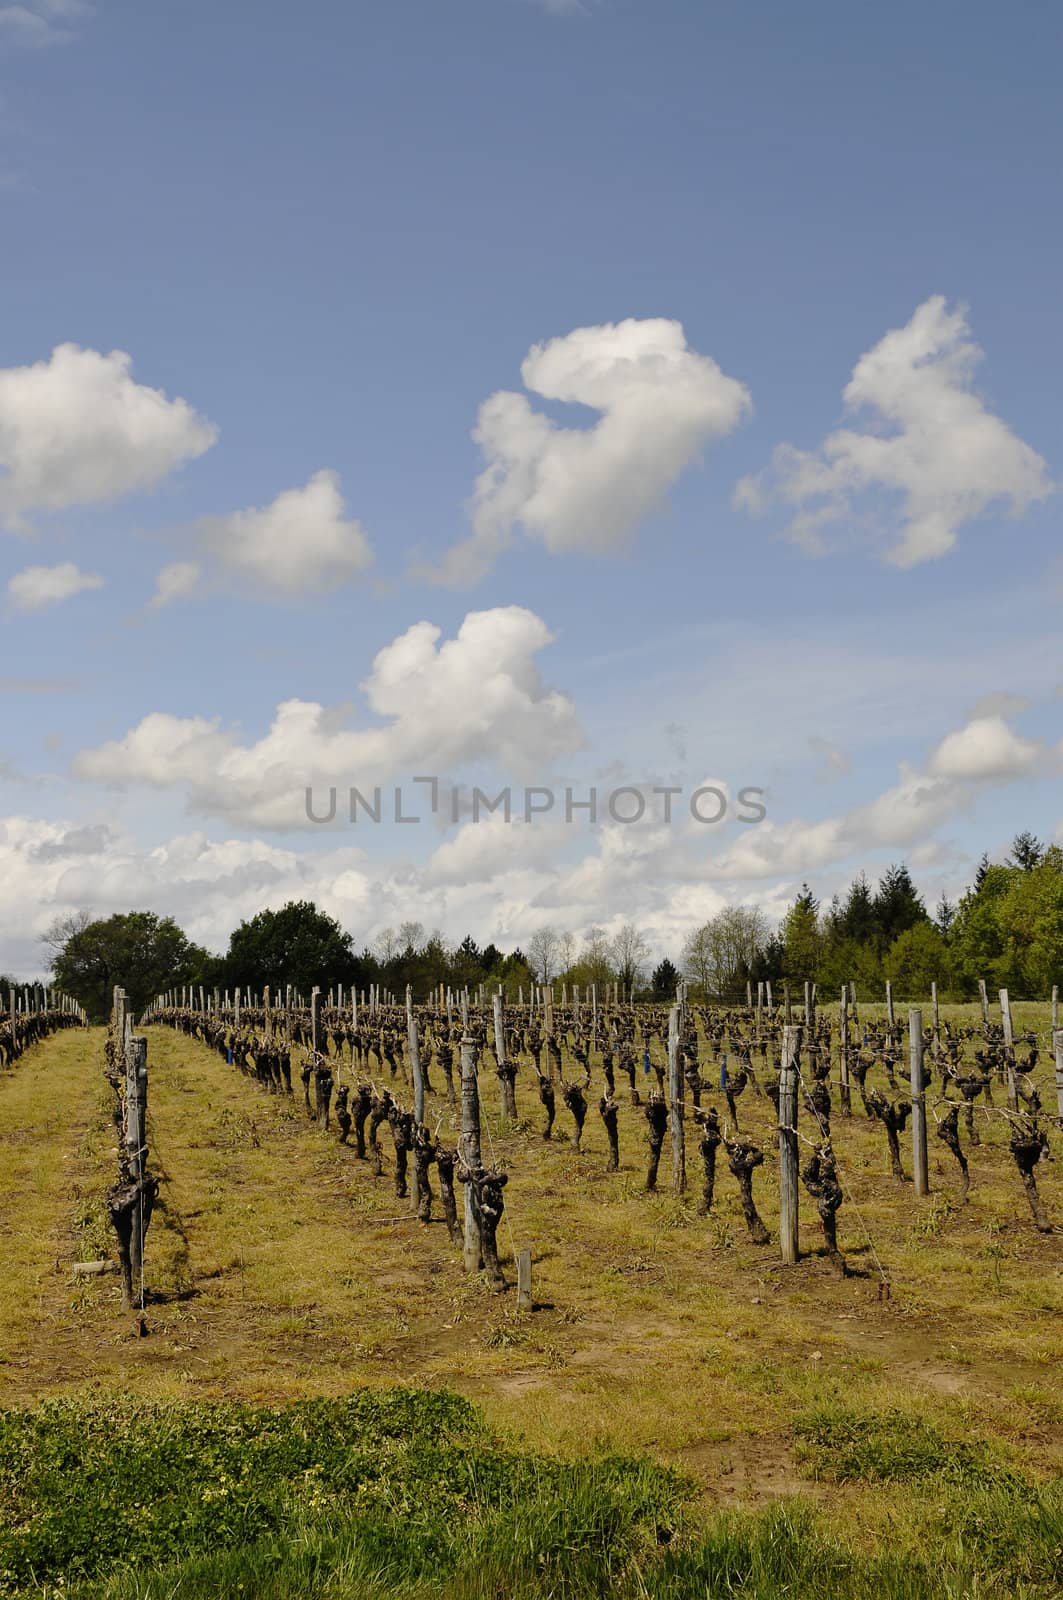 Vineyard with a Blue Sky by shkyo30